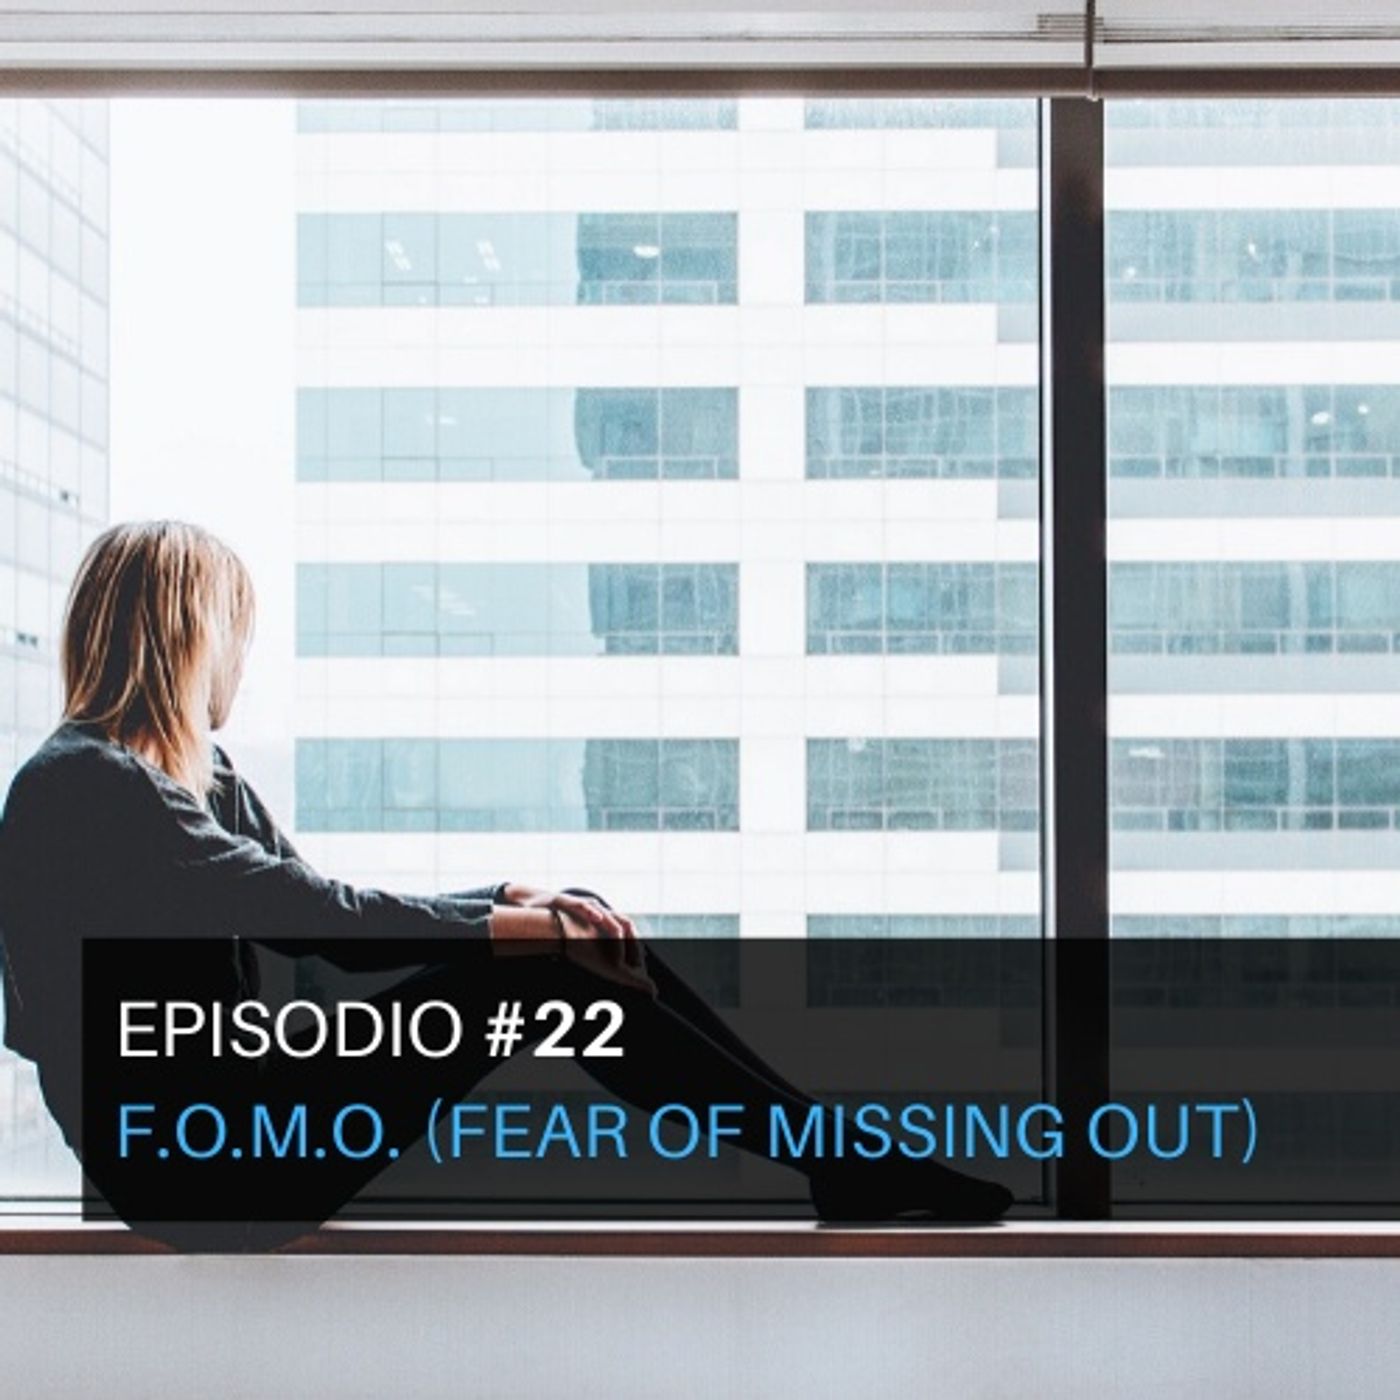 Episodio#22- F.O.M.O. (Fear of missing out)